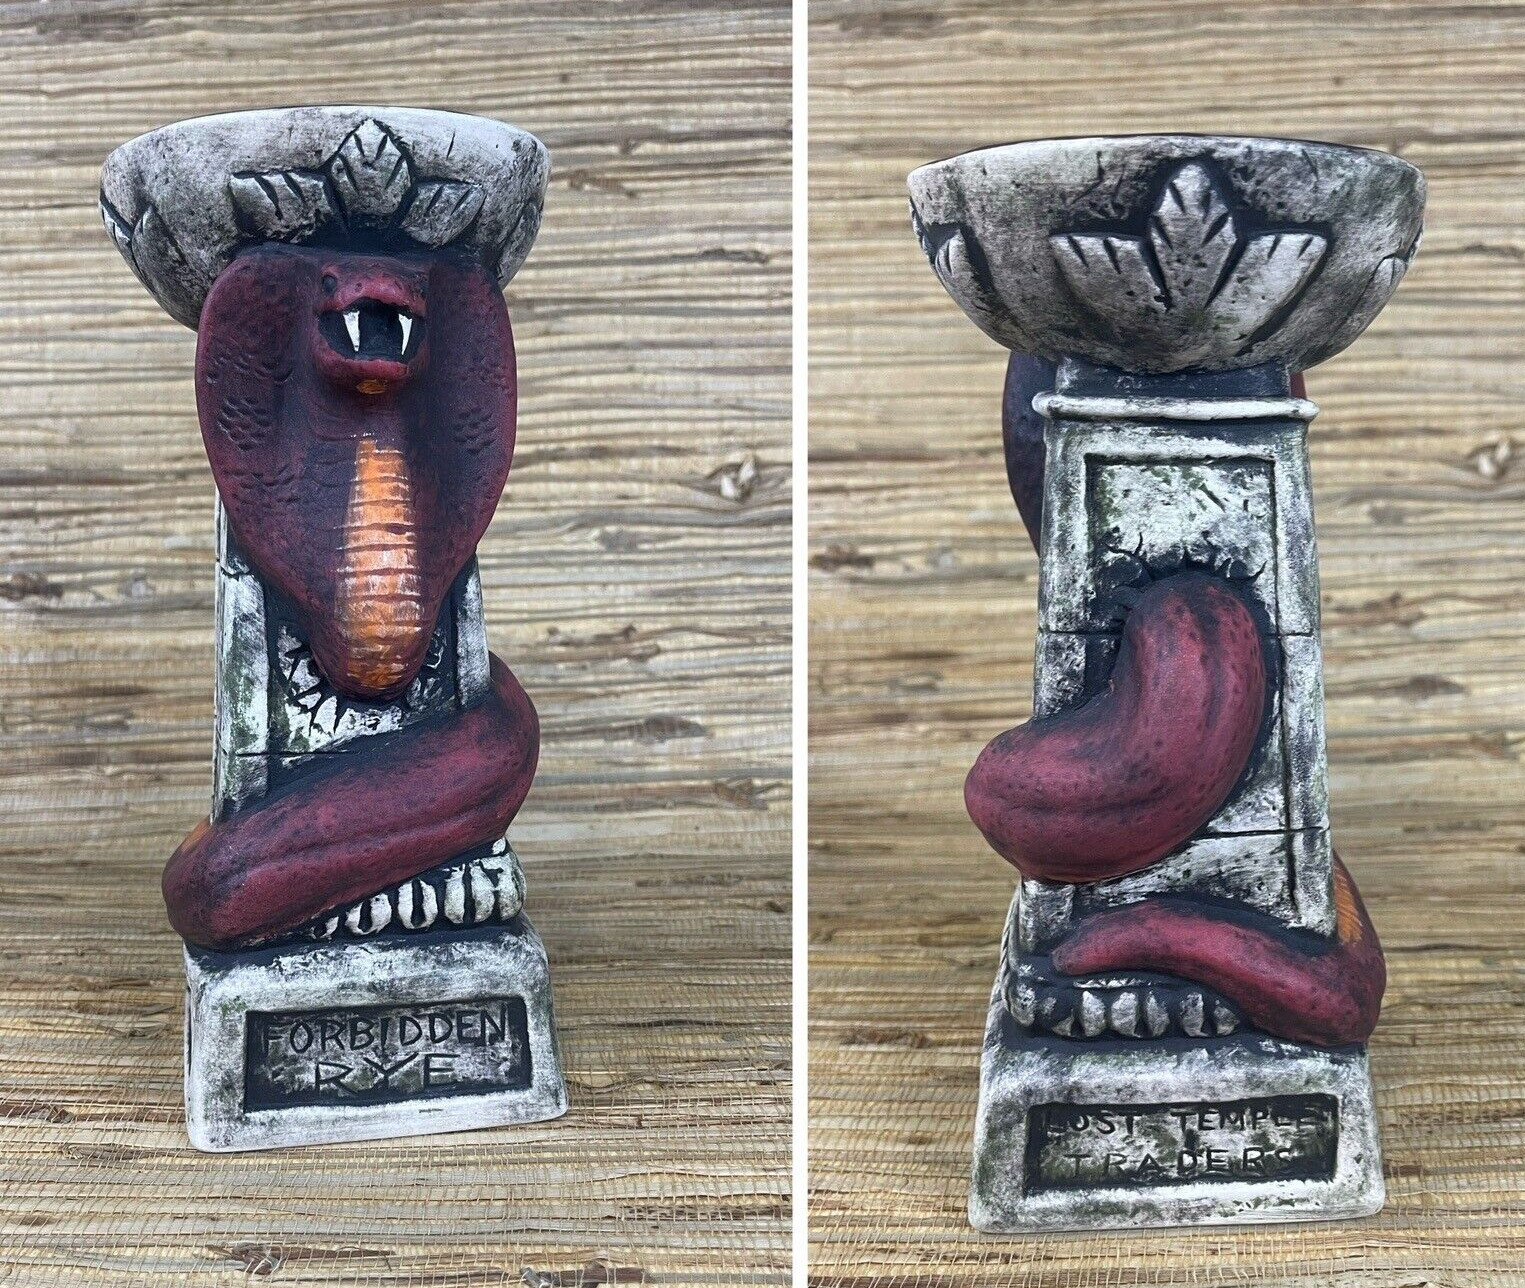 Forbidden Rye Tiki Mug #166/250 1st Edition by Lost Temple Traders 2022 Bauer